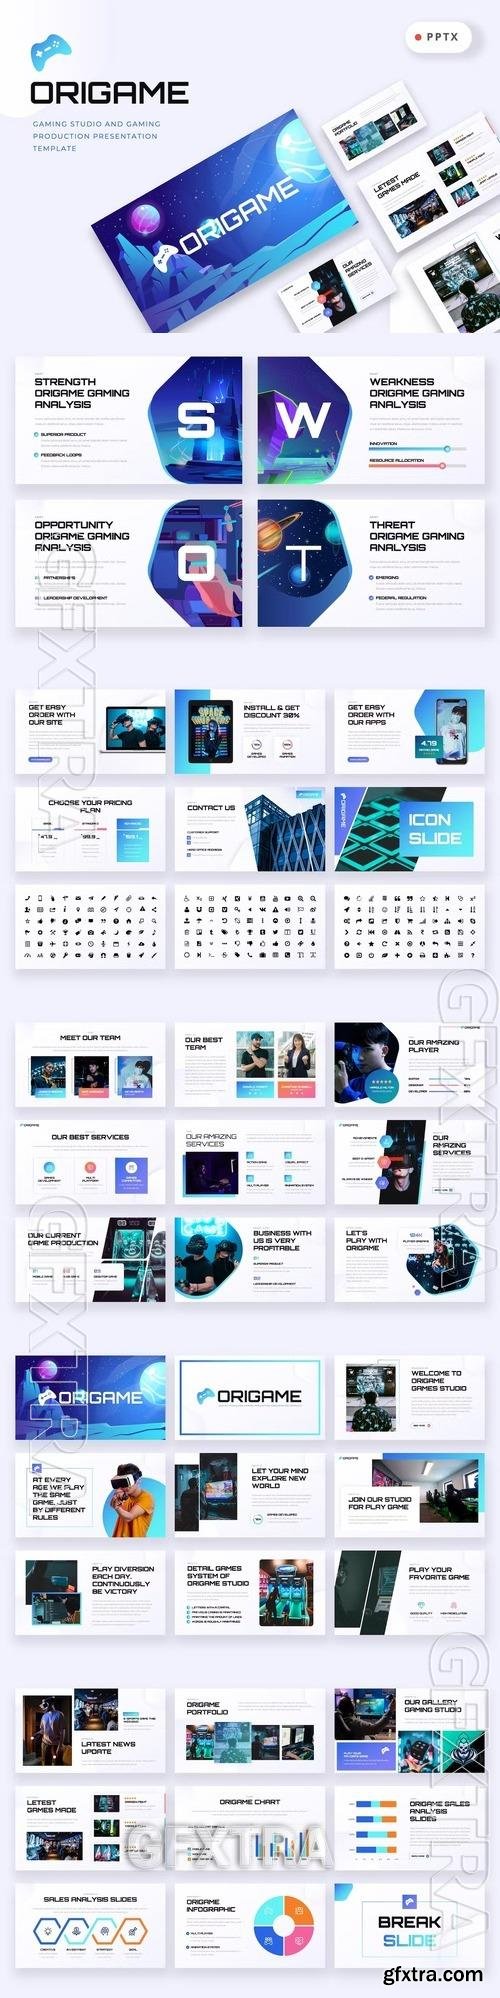 ORIGAME - Gaming Studio Powerpoint Template F96LUMG